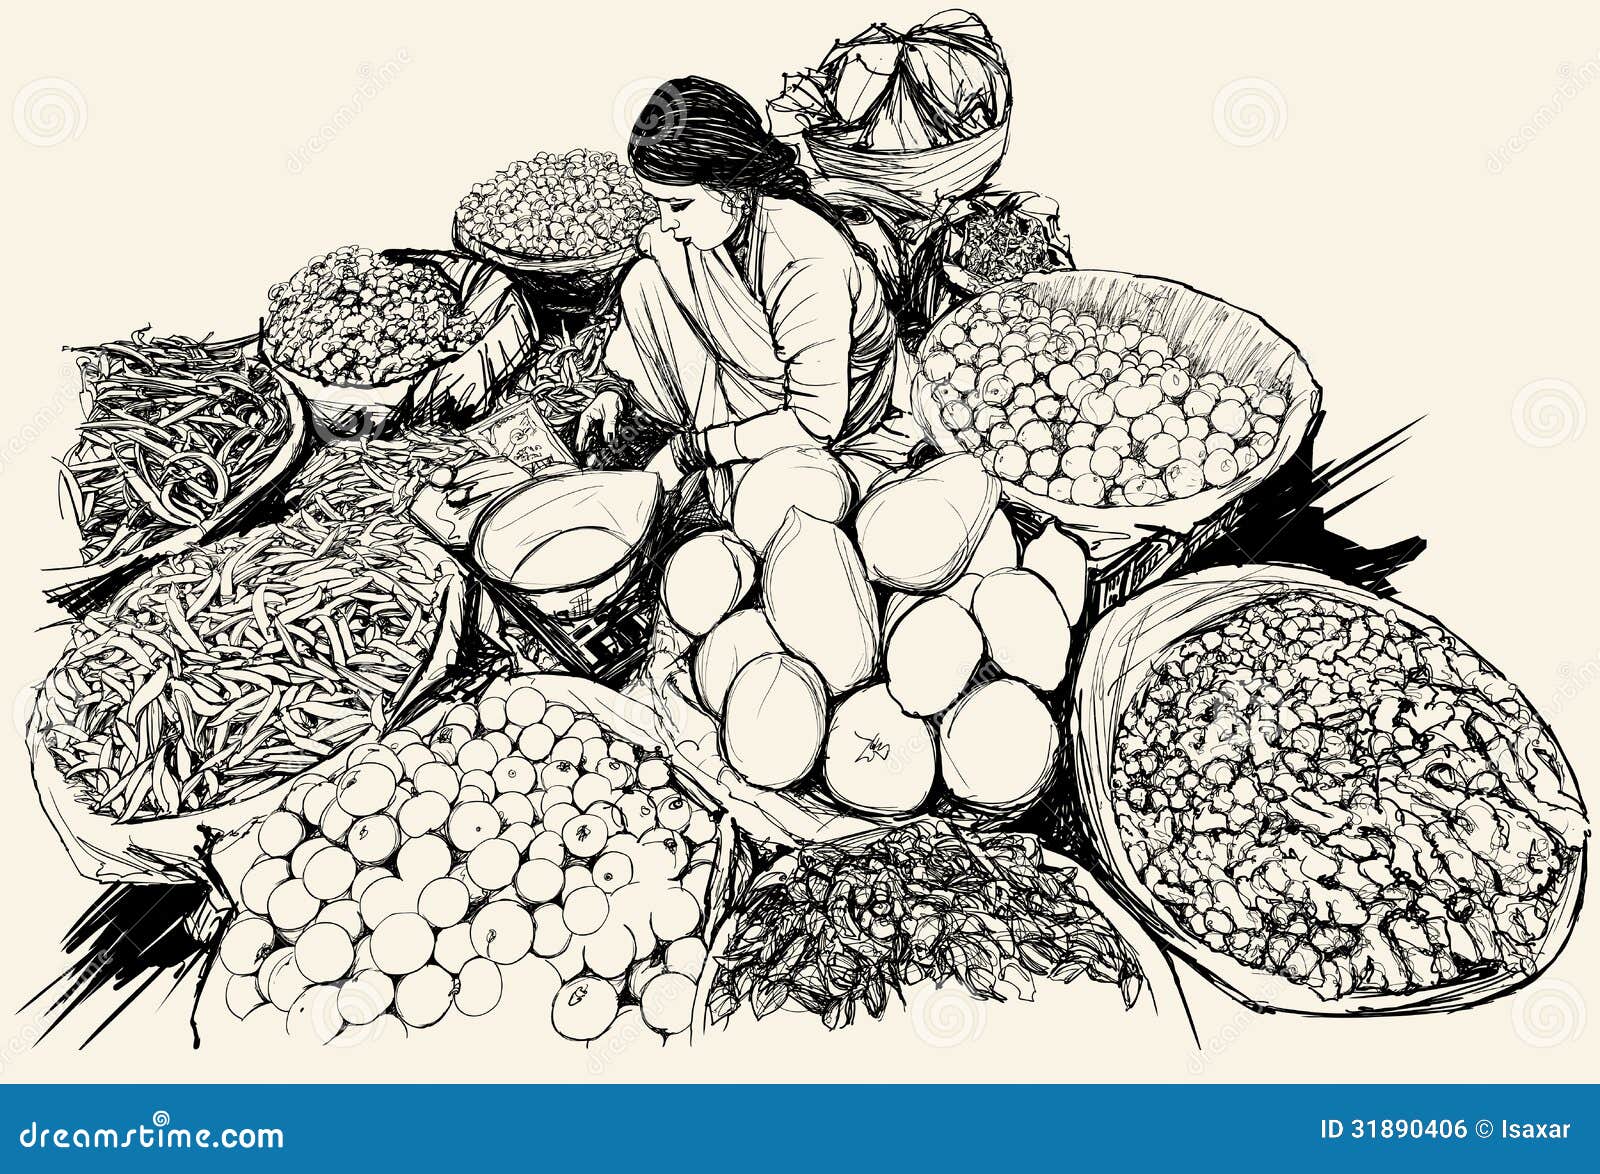 India Woman Selling Fruit And Vegetable In A Market Stock Illustration -  Download Image Now - iStock